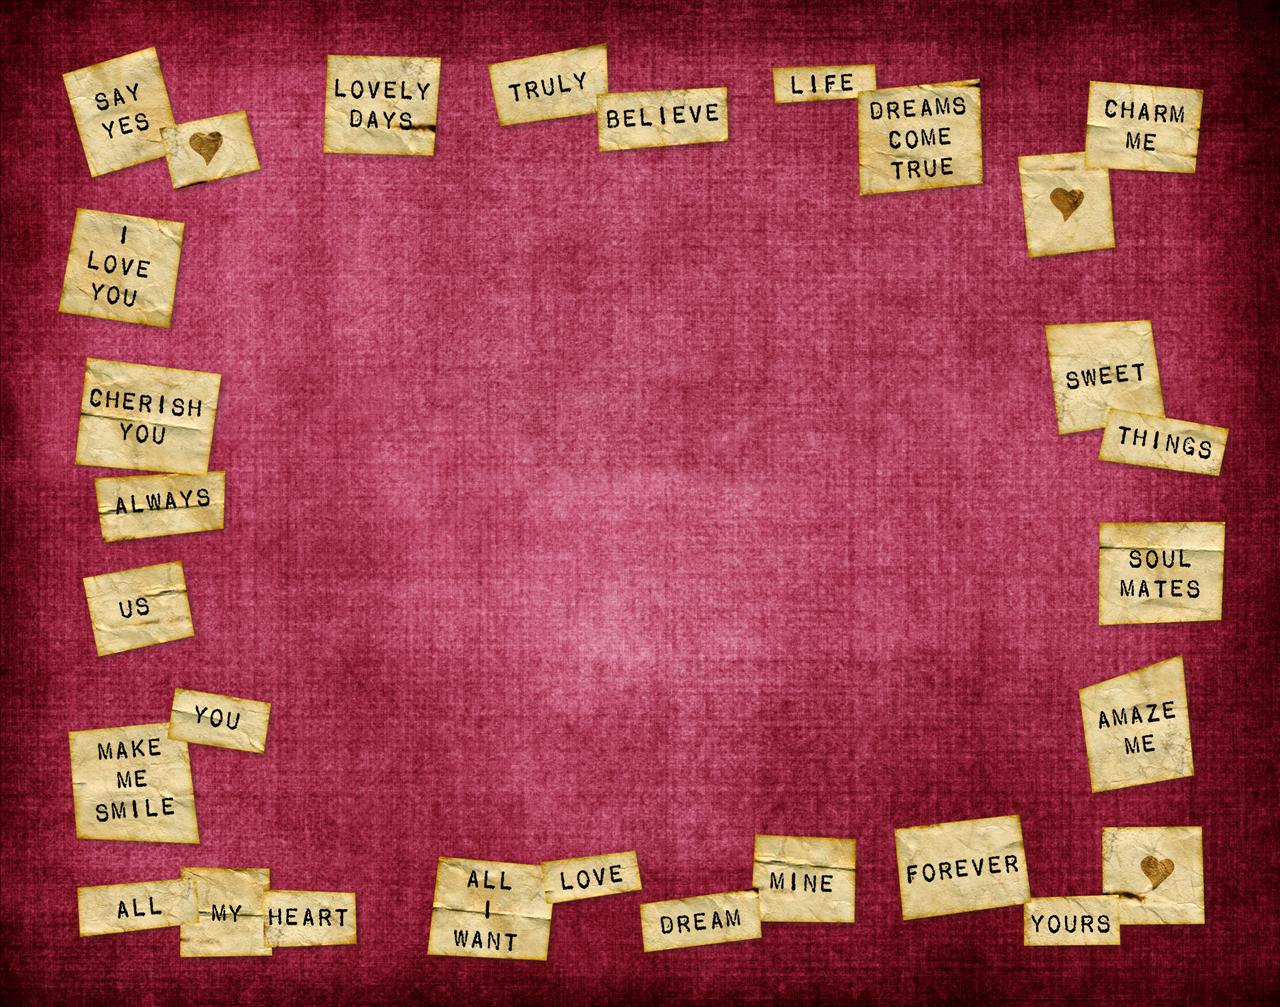 Words of Love on Burgundy free powerpoint background